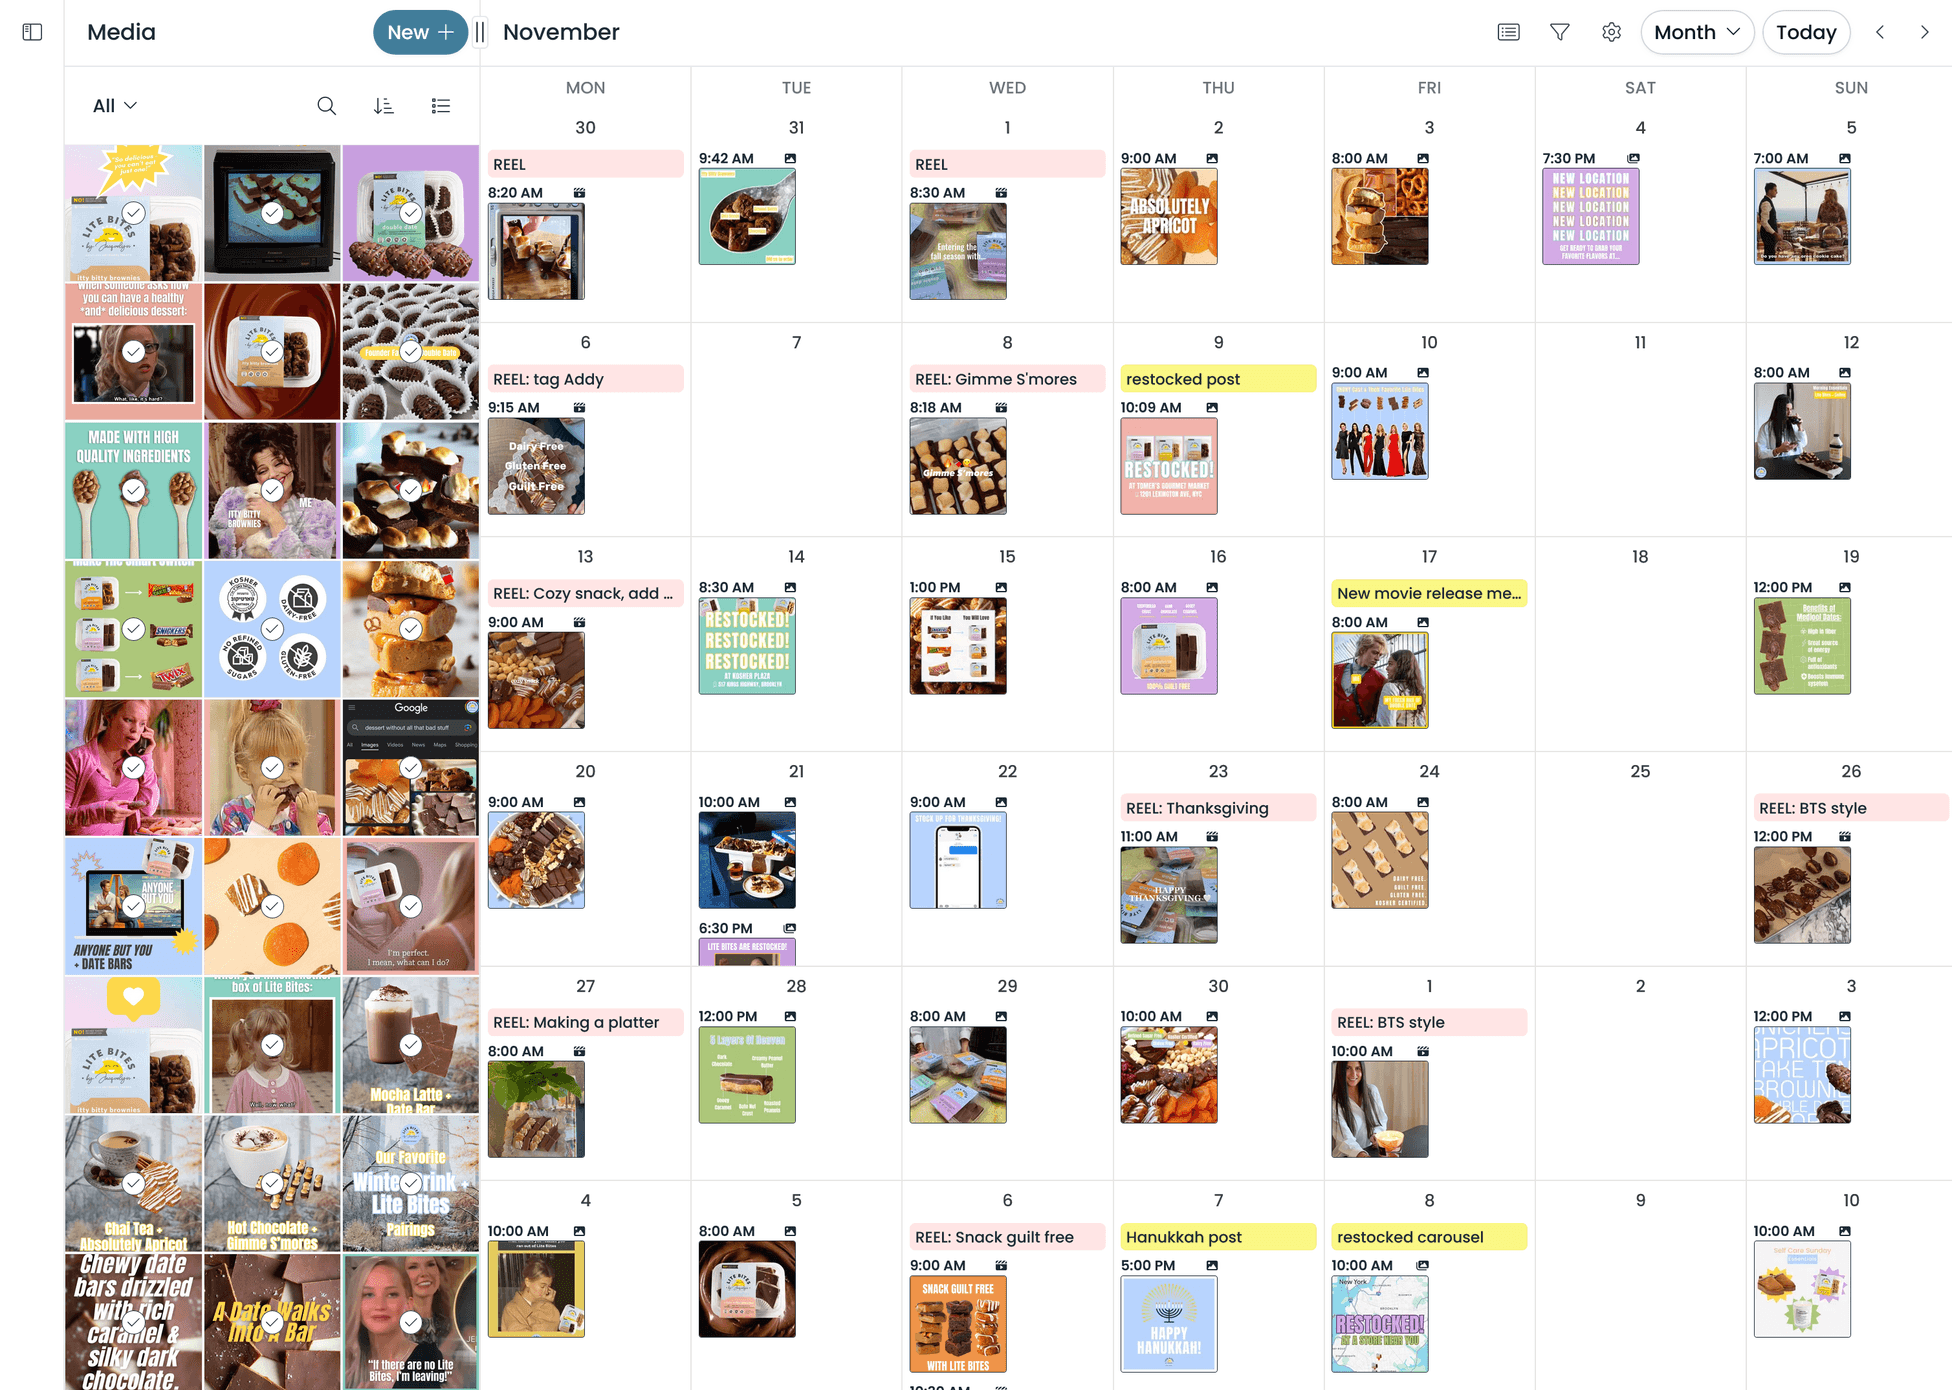 A calendar with social media posts scheduled